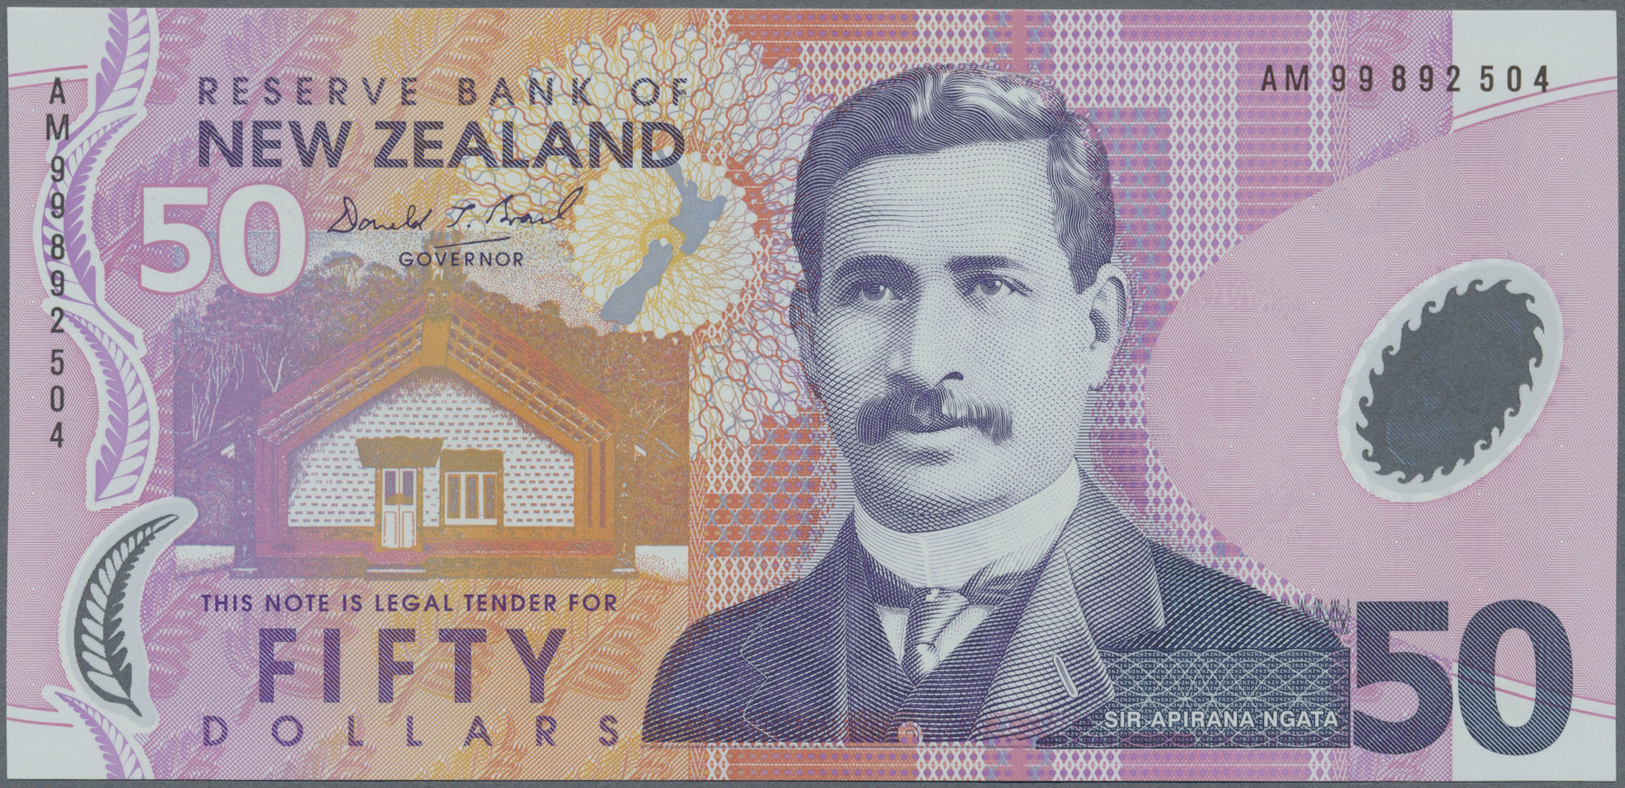 01845 New Zealand / Neuseeland: Set Of 2 Notes 50 Dollars ND Polymer P. 188a In Condition: UNC. (2 Pcs) - New Zealand